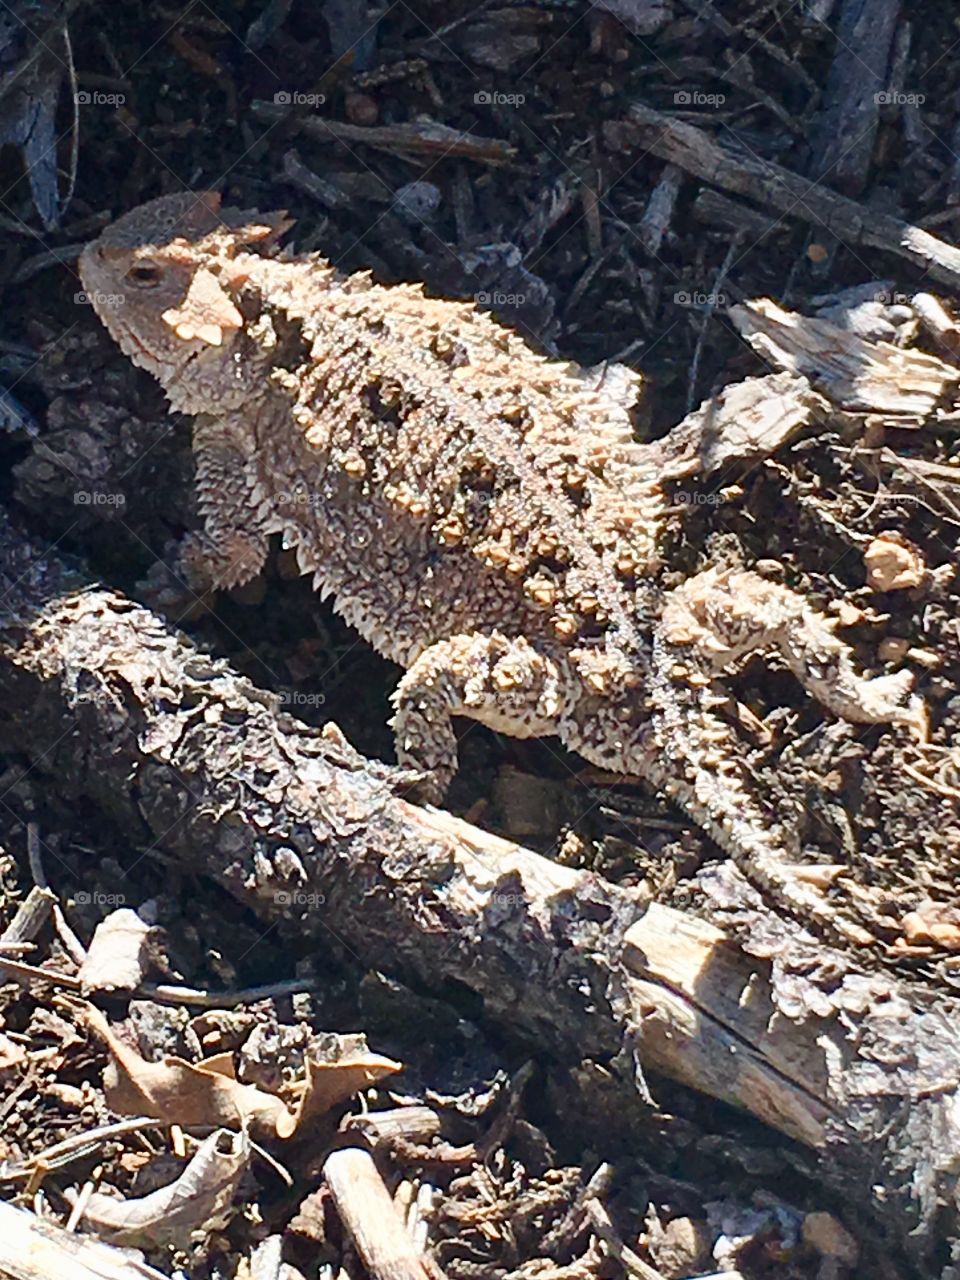 A short-horned lizard seeks to evade capture by blending in to its surroundings.